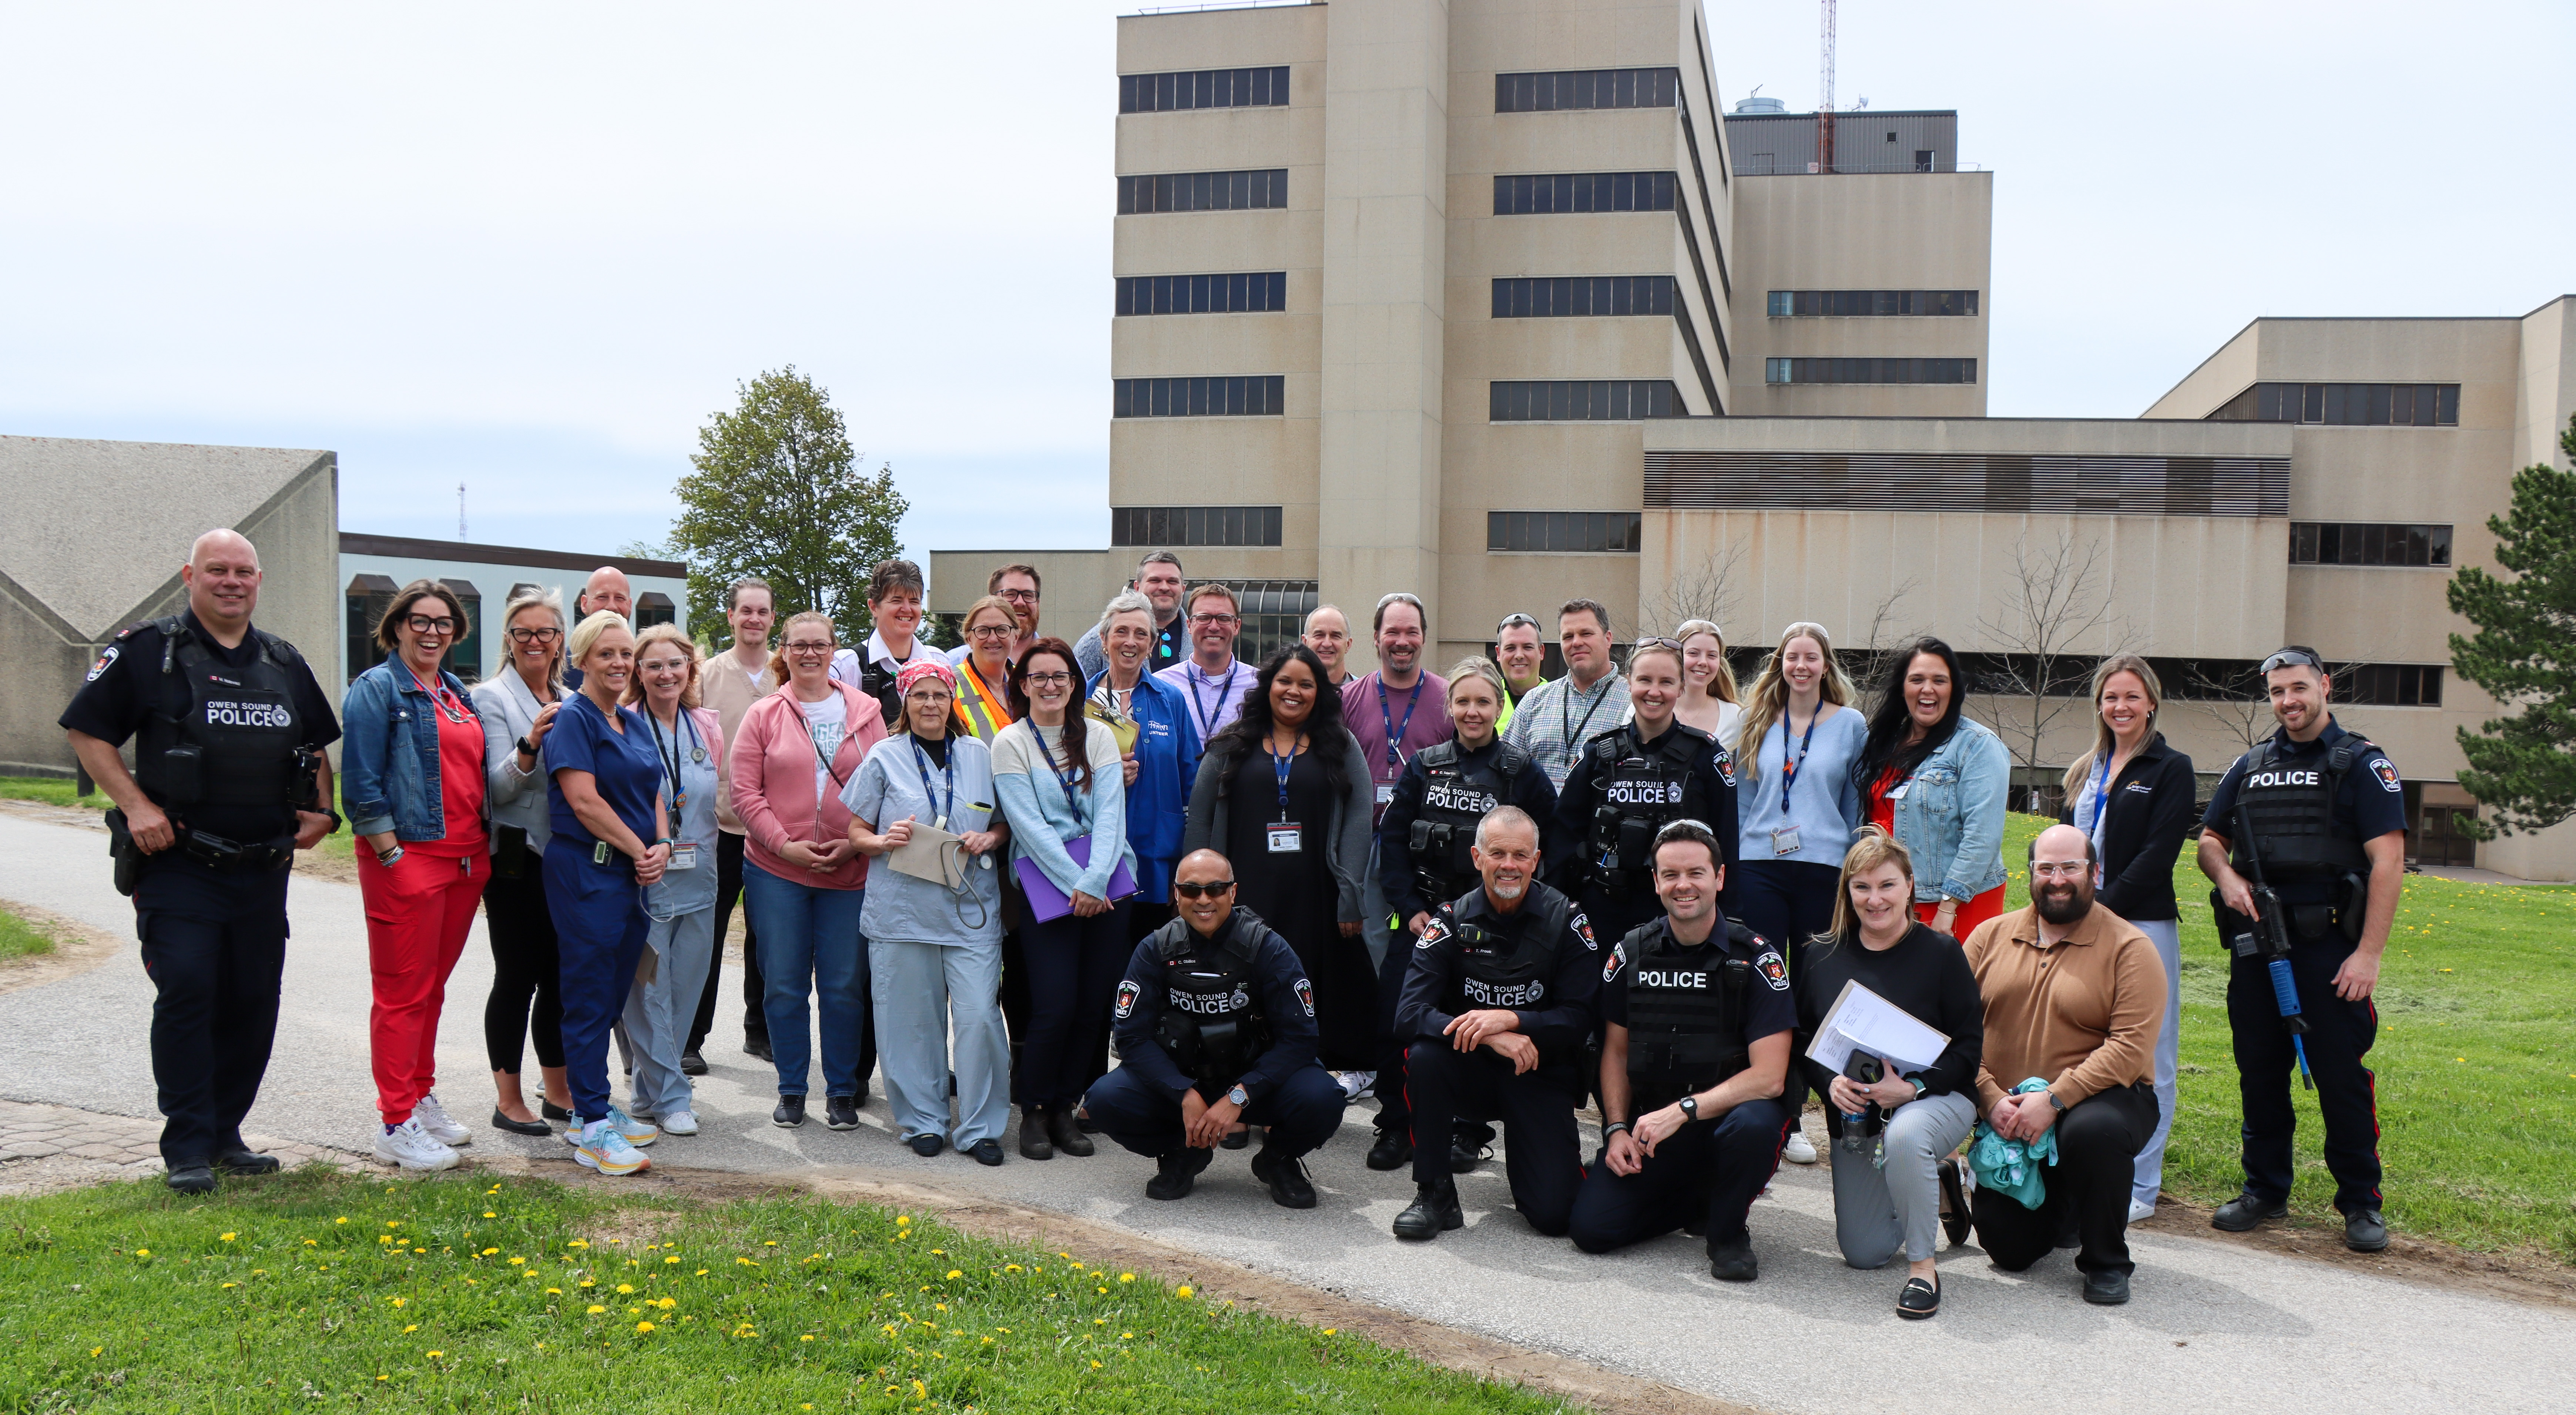 Brightshores & OSPS Staff outside the hospital